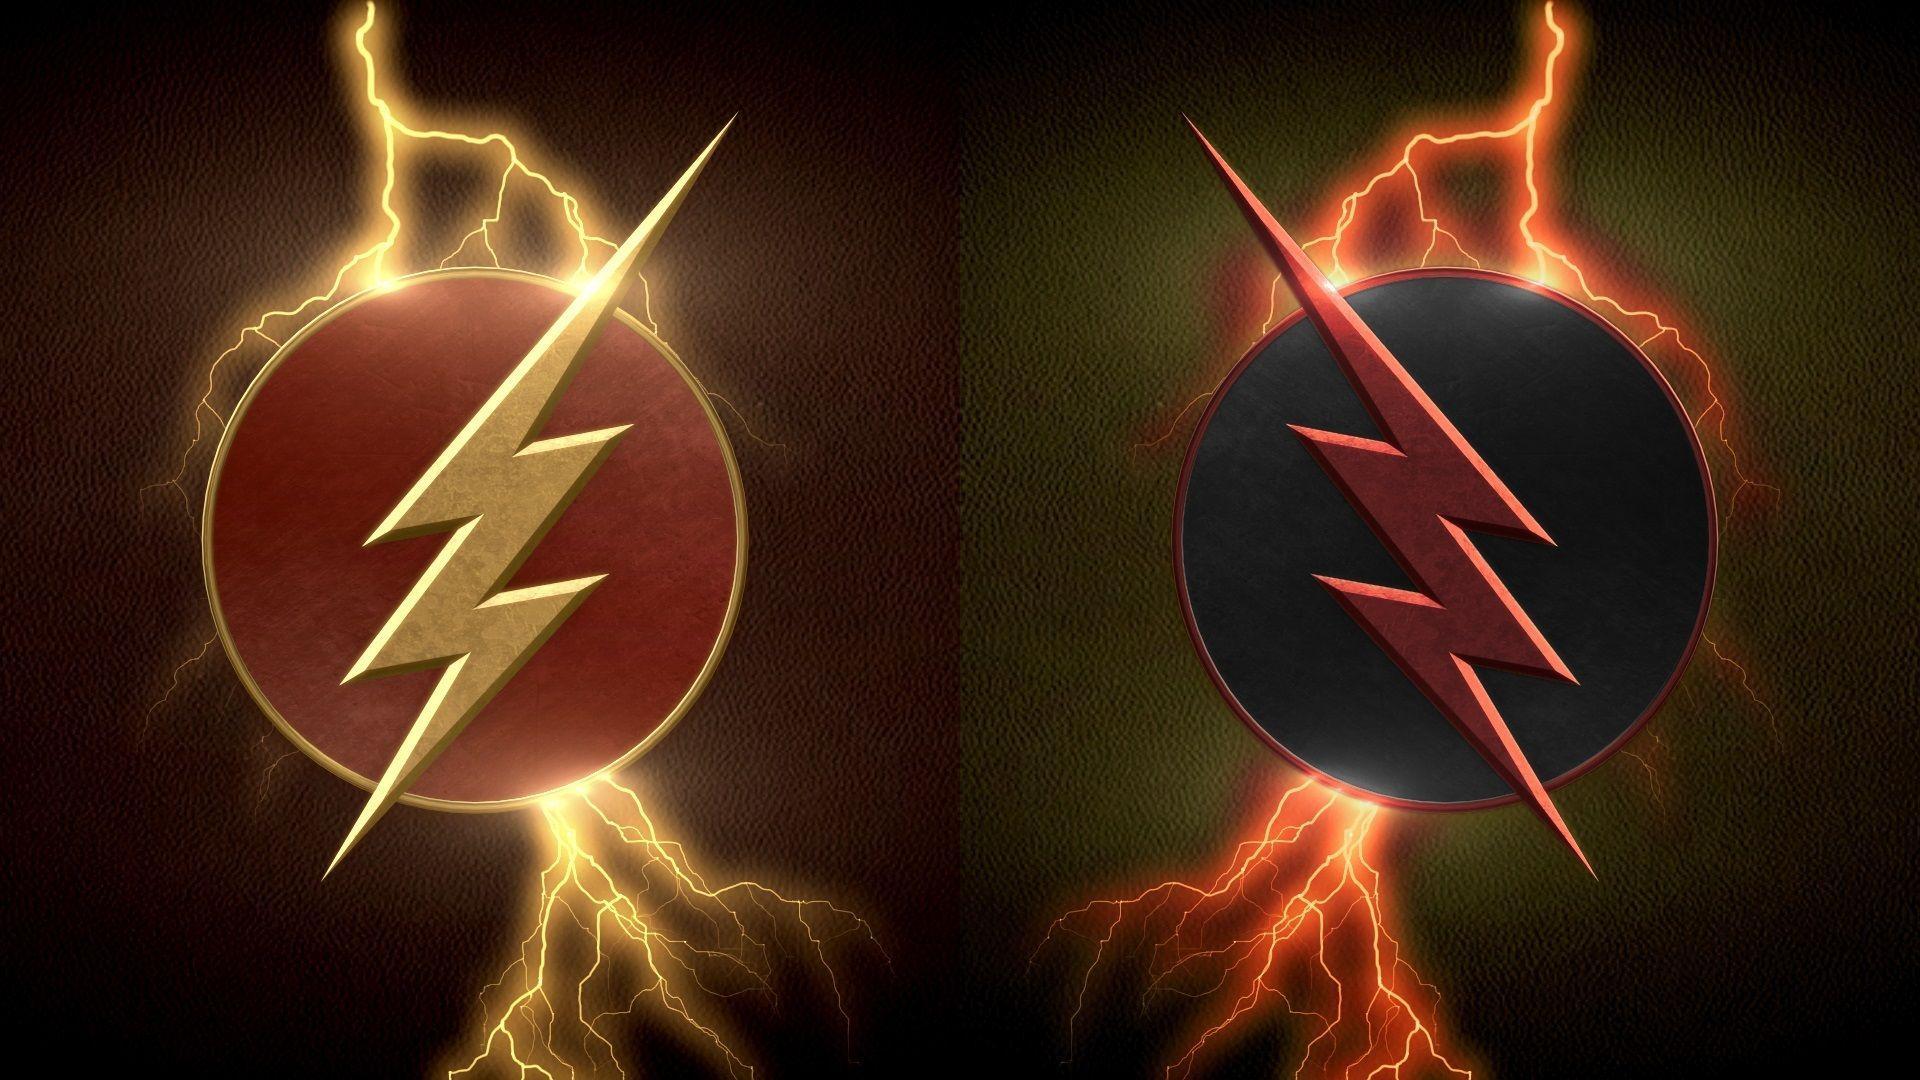 High Definition Collection: Reverse Flash Wallpaper, 43 Full HD